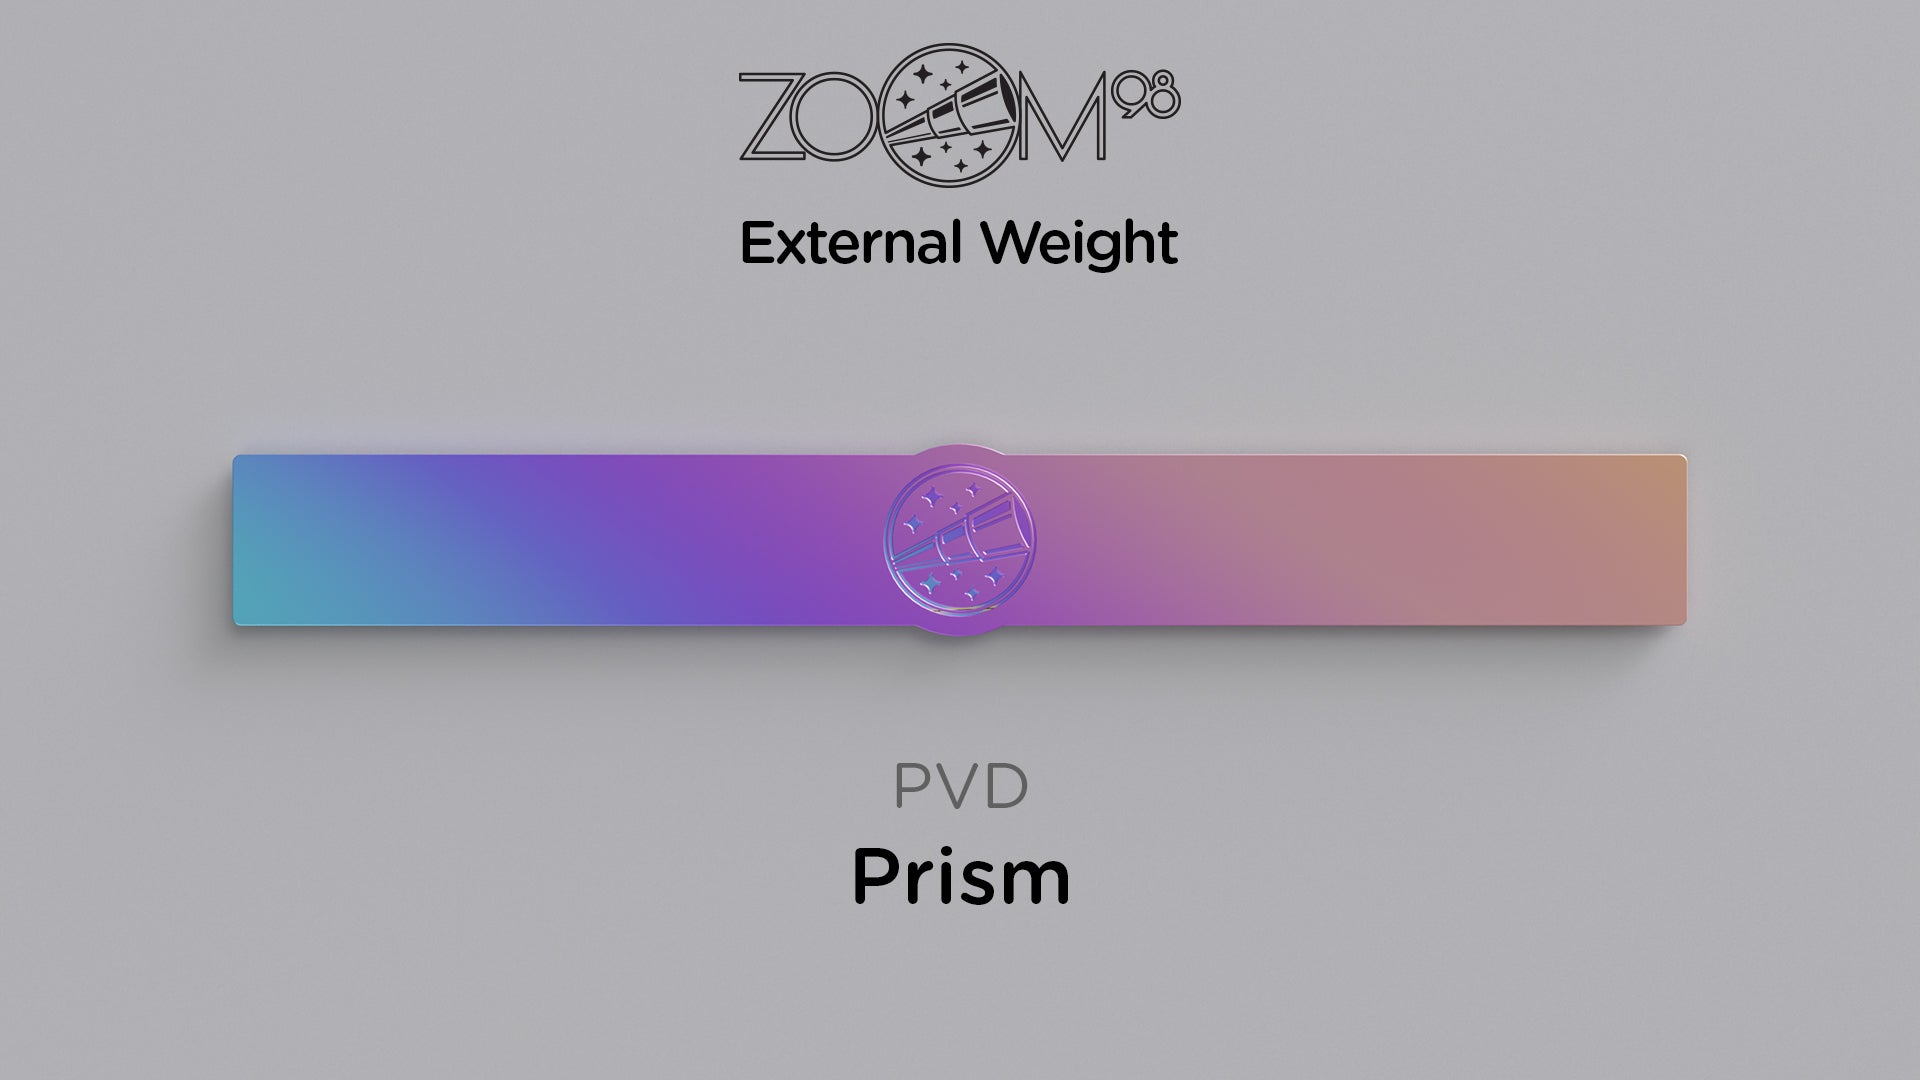 Zoom98 Extra Weights